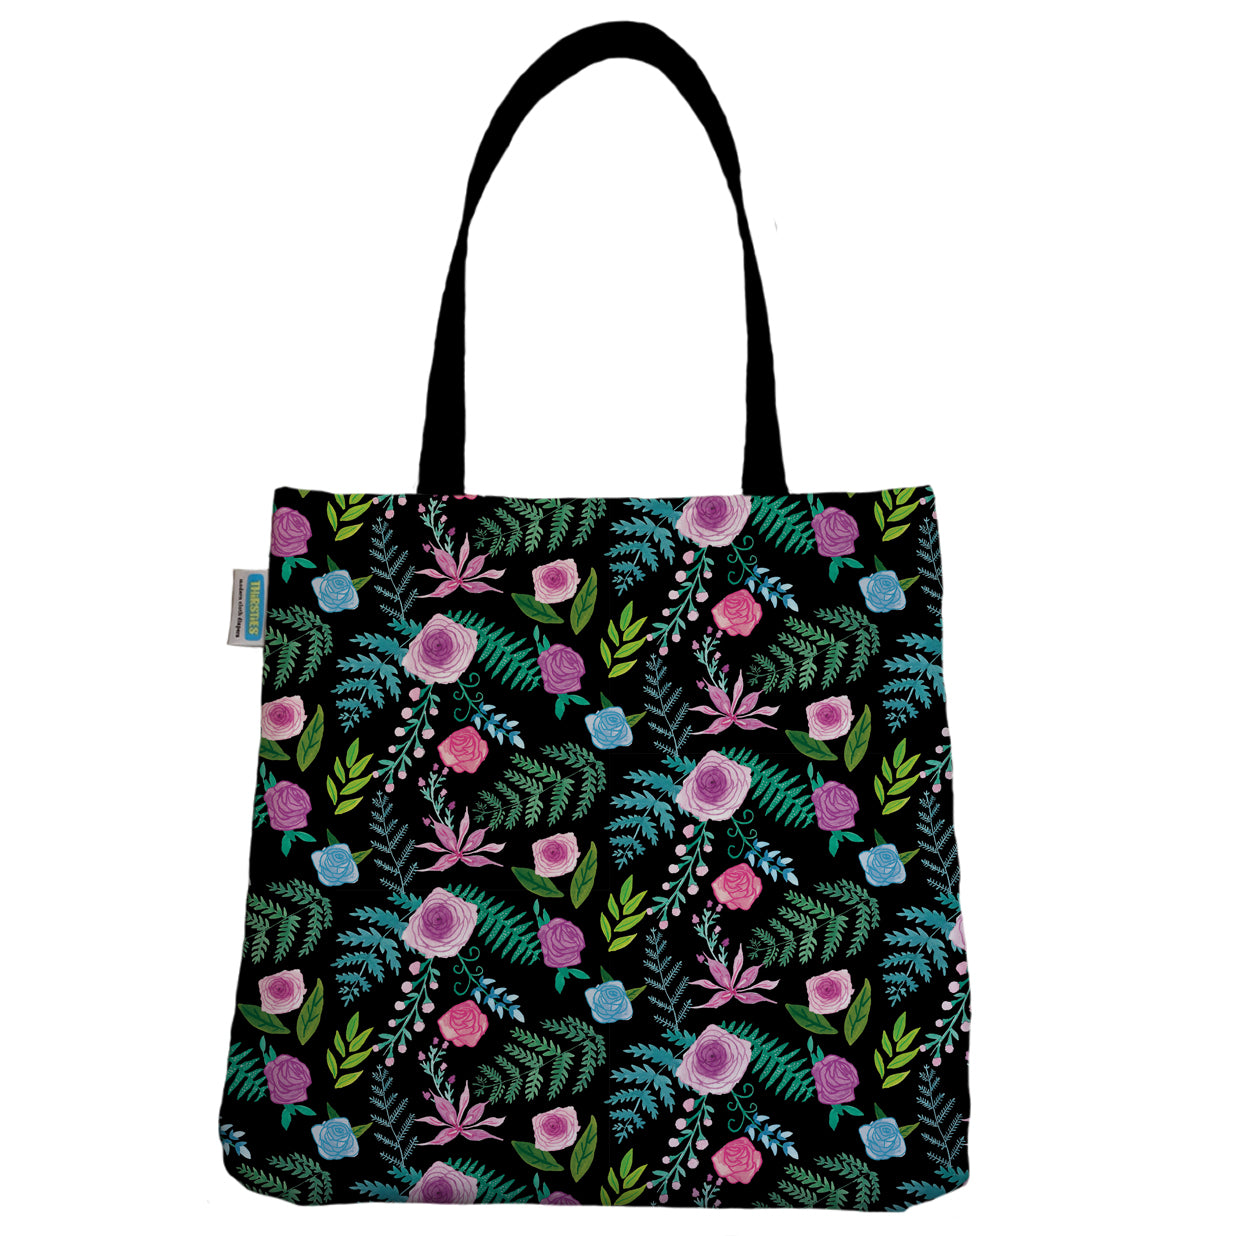 Pink Canvas Tote Bag New With Tag Reusable Tote Bag